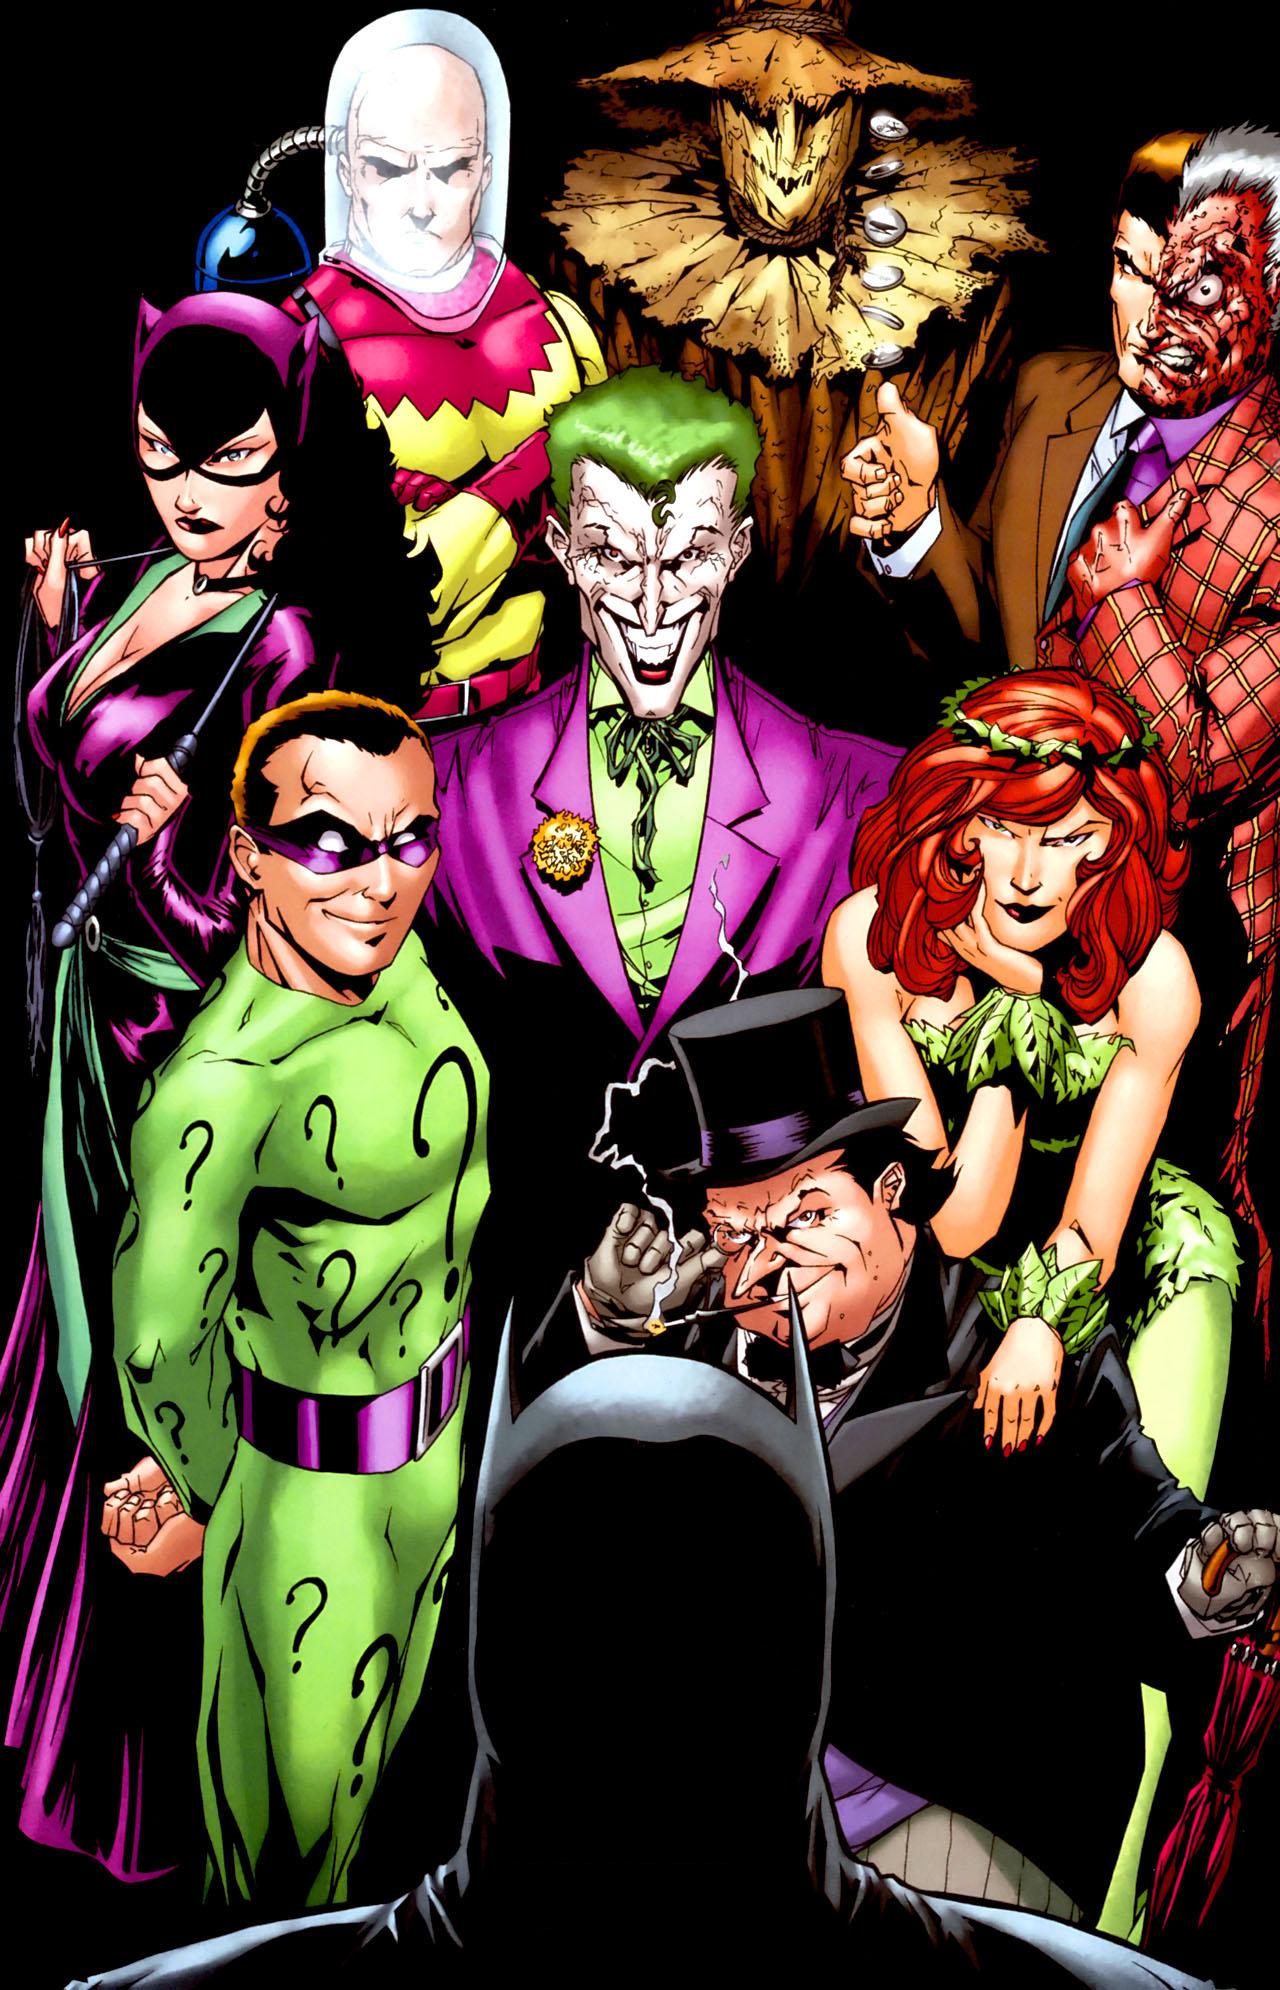 Who Has The Best Villains in Comics?